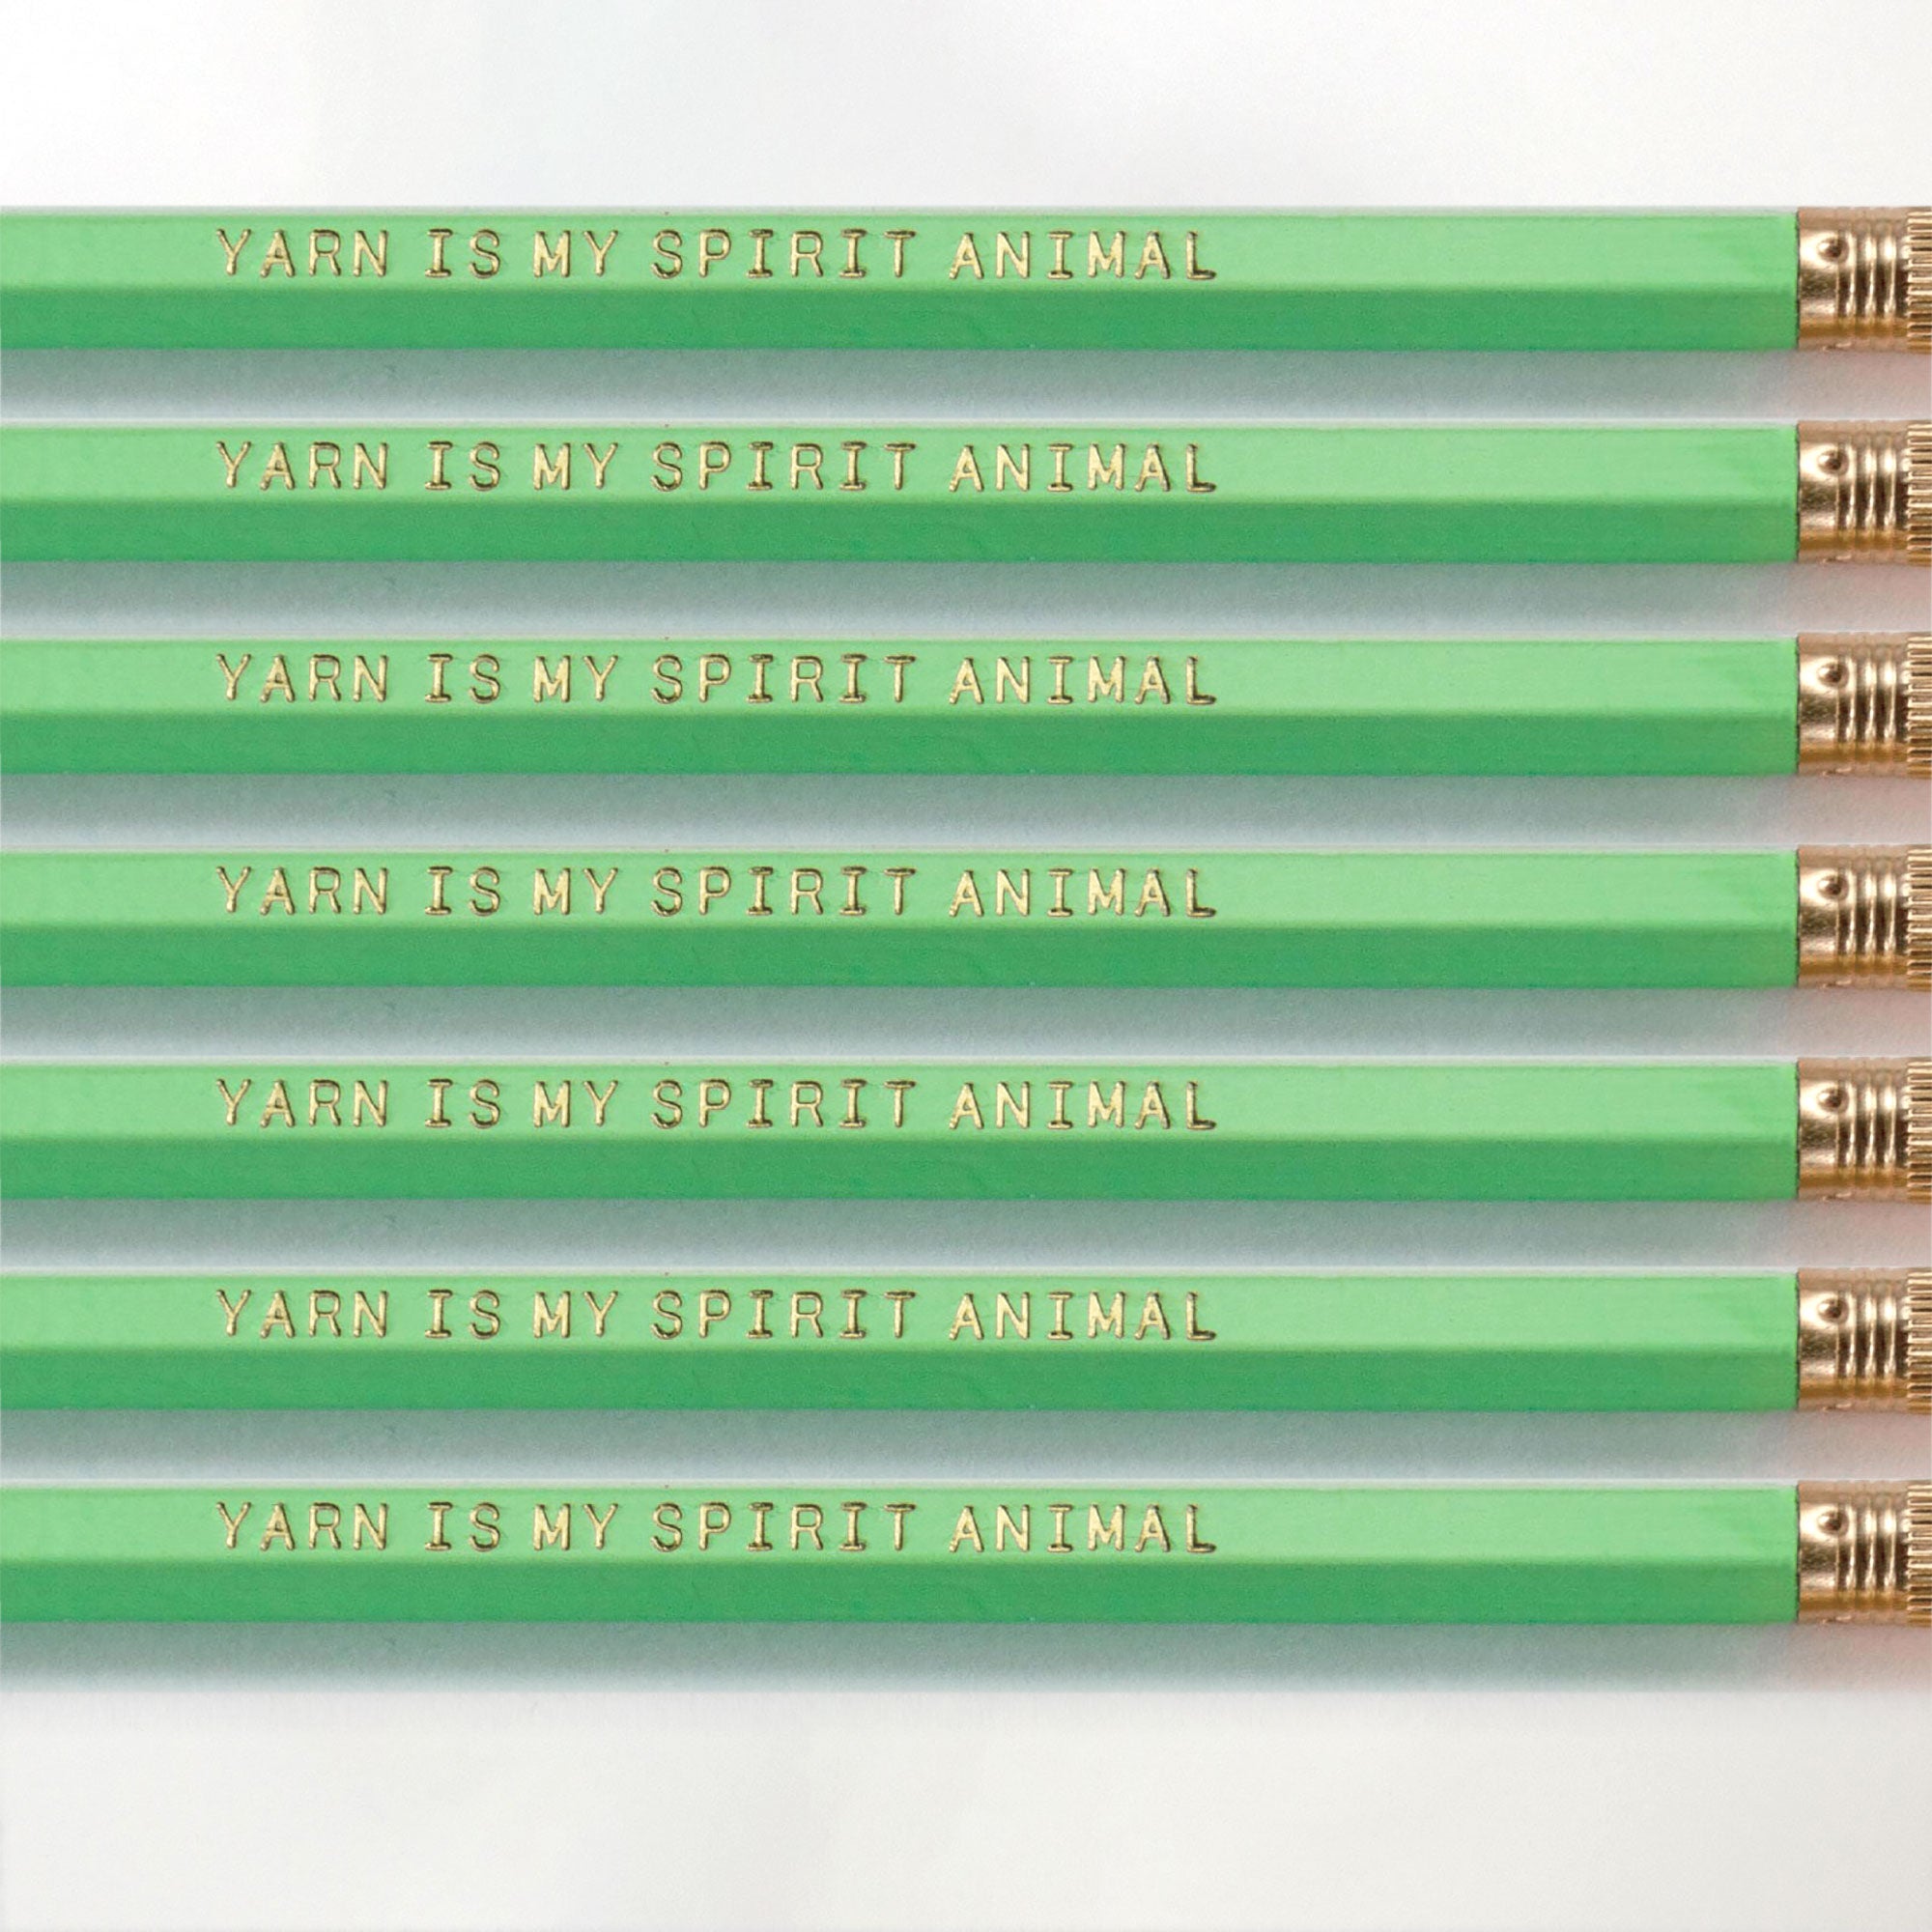 "Yarn is my spirit animal" pencil set gift for knitters and crocheters